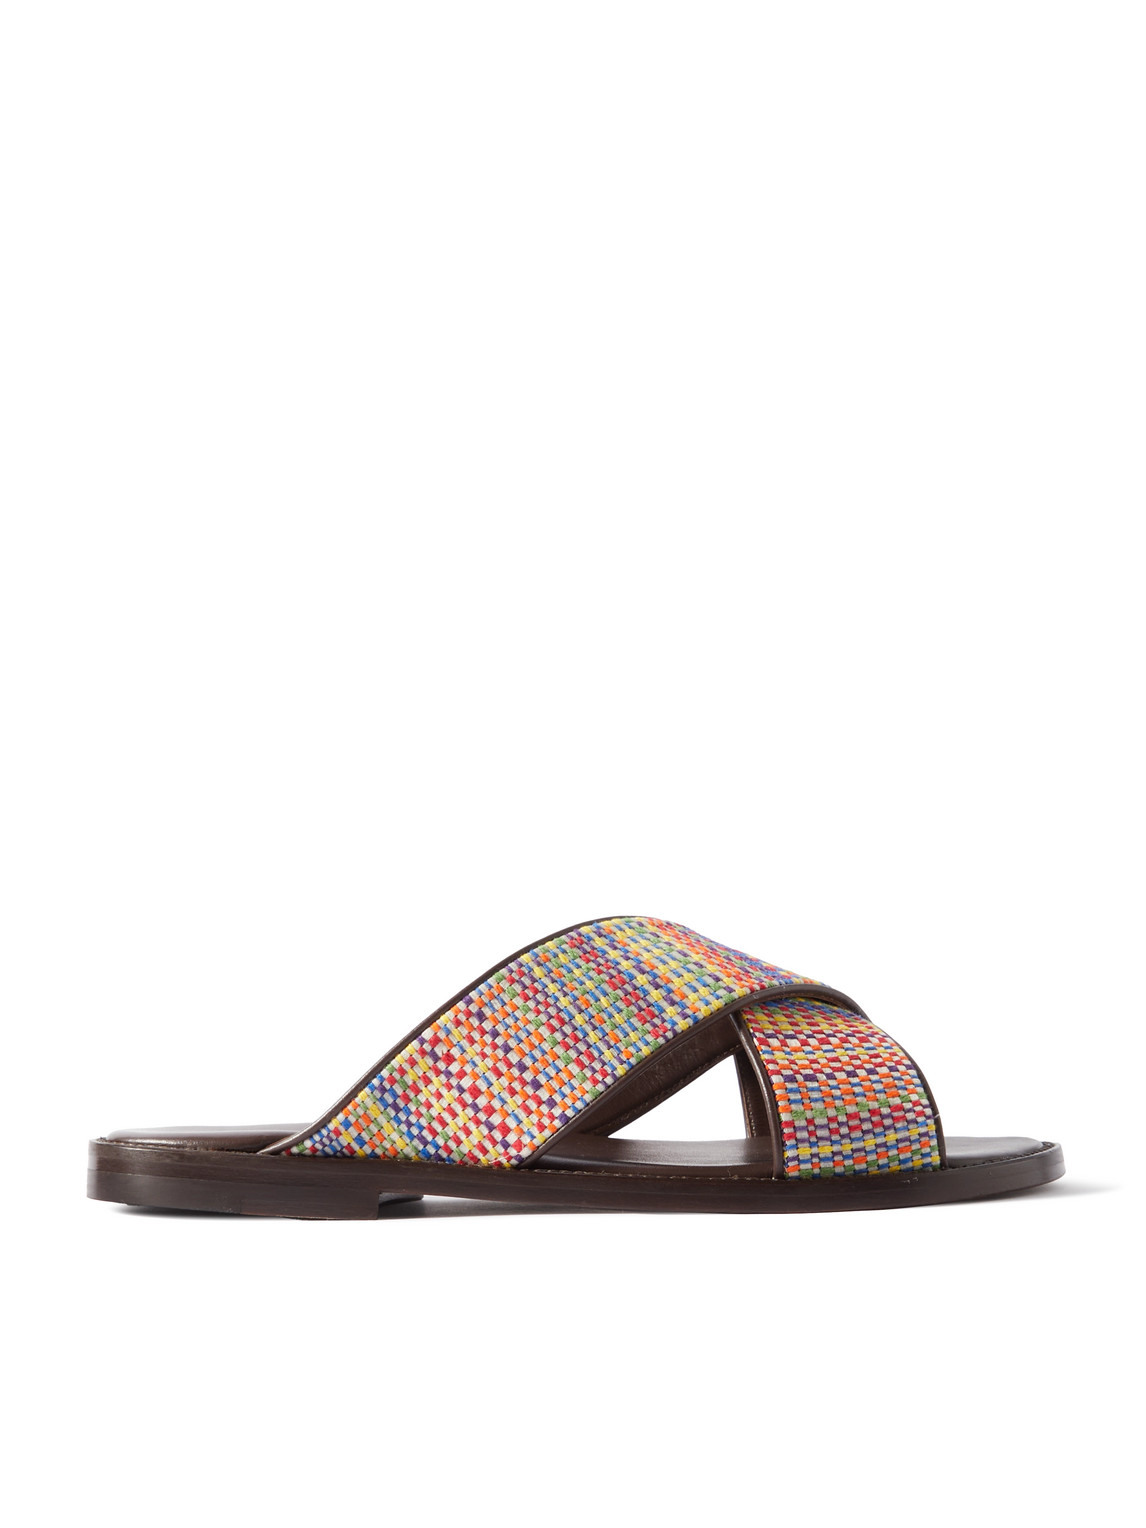 Otawi Leather-Trimmed Jacquard Sandals